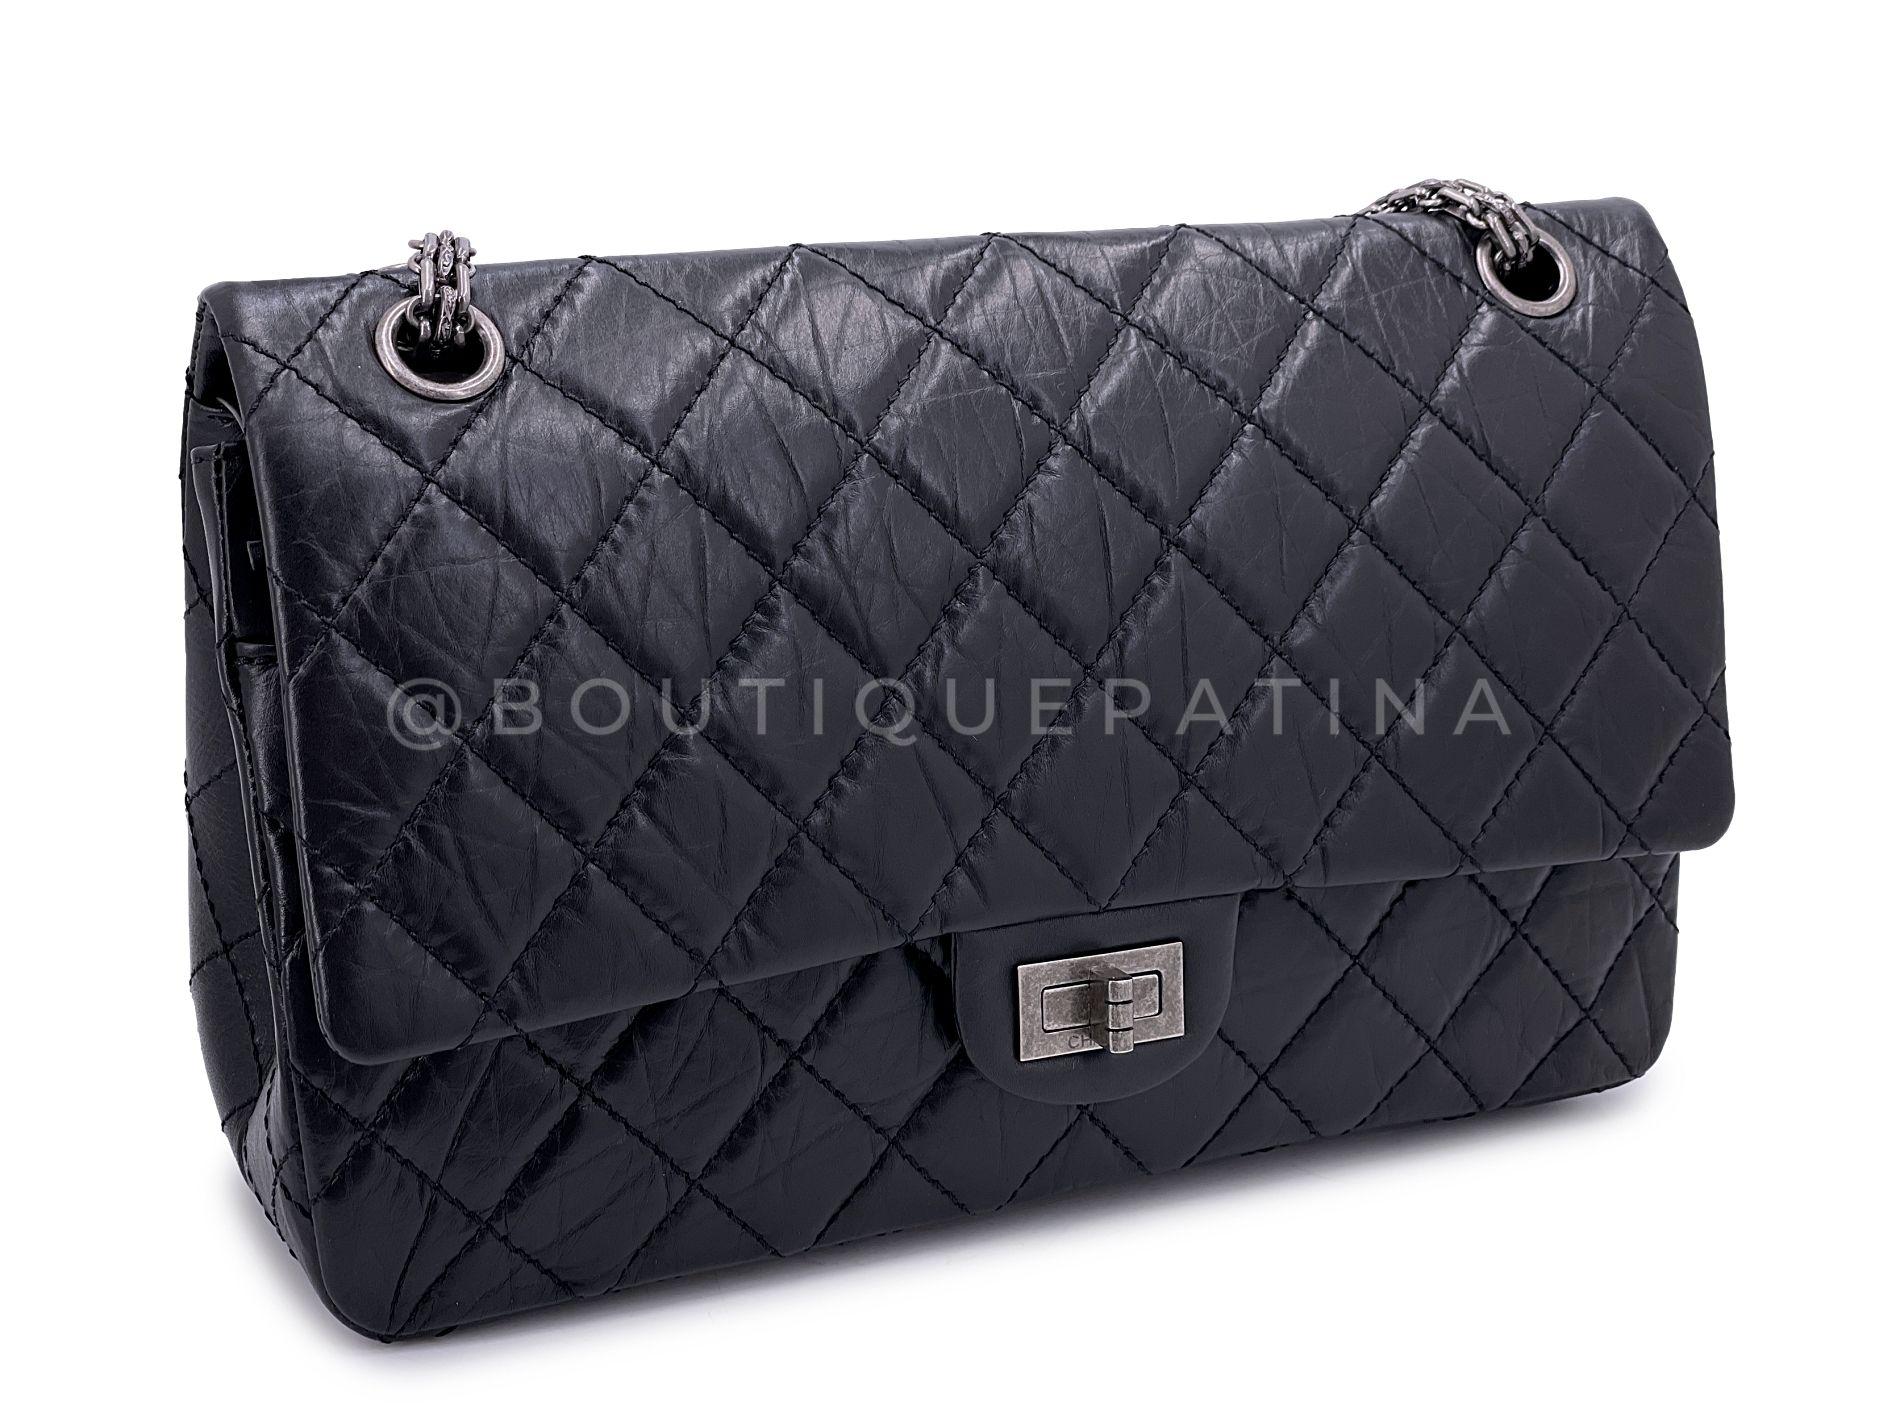 Chanel Black Medium 226 2.55 Reissue Classic Double Flap Bag RHW 66867 In Excellent Condition For Sale In Costa Mesa, CA